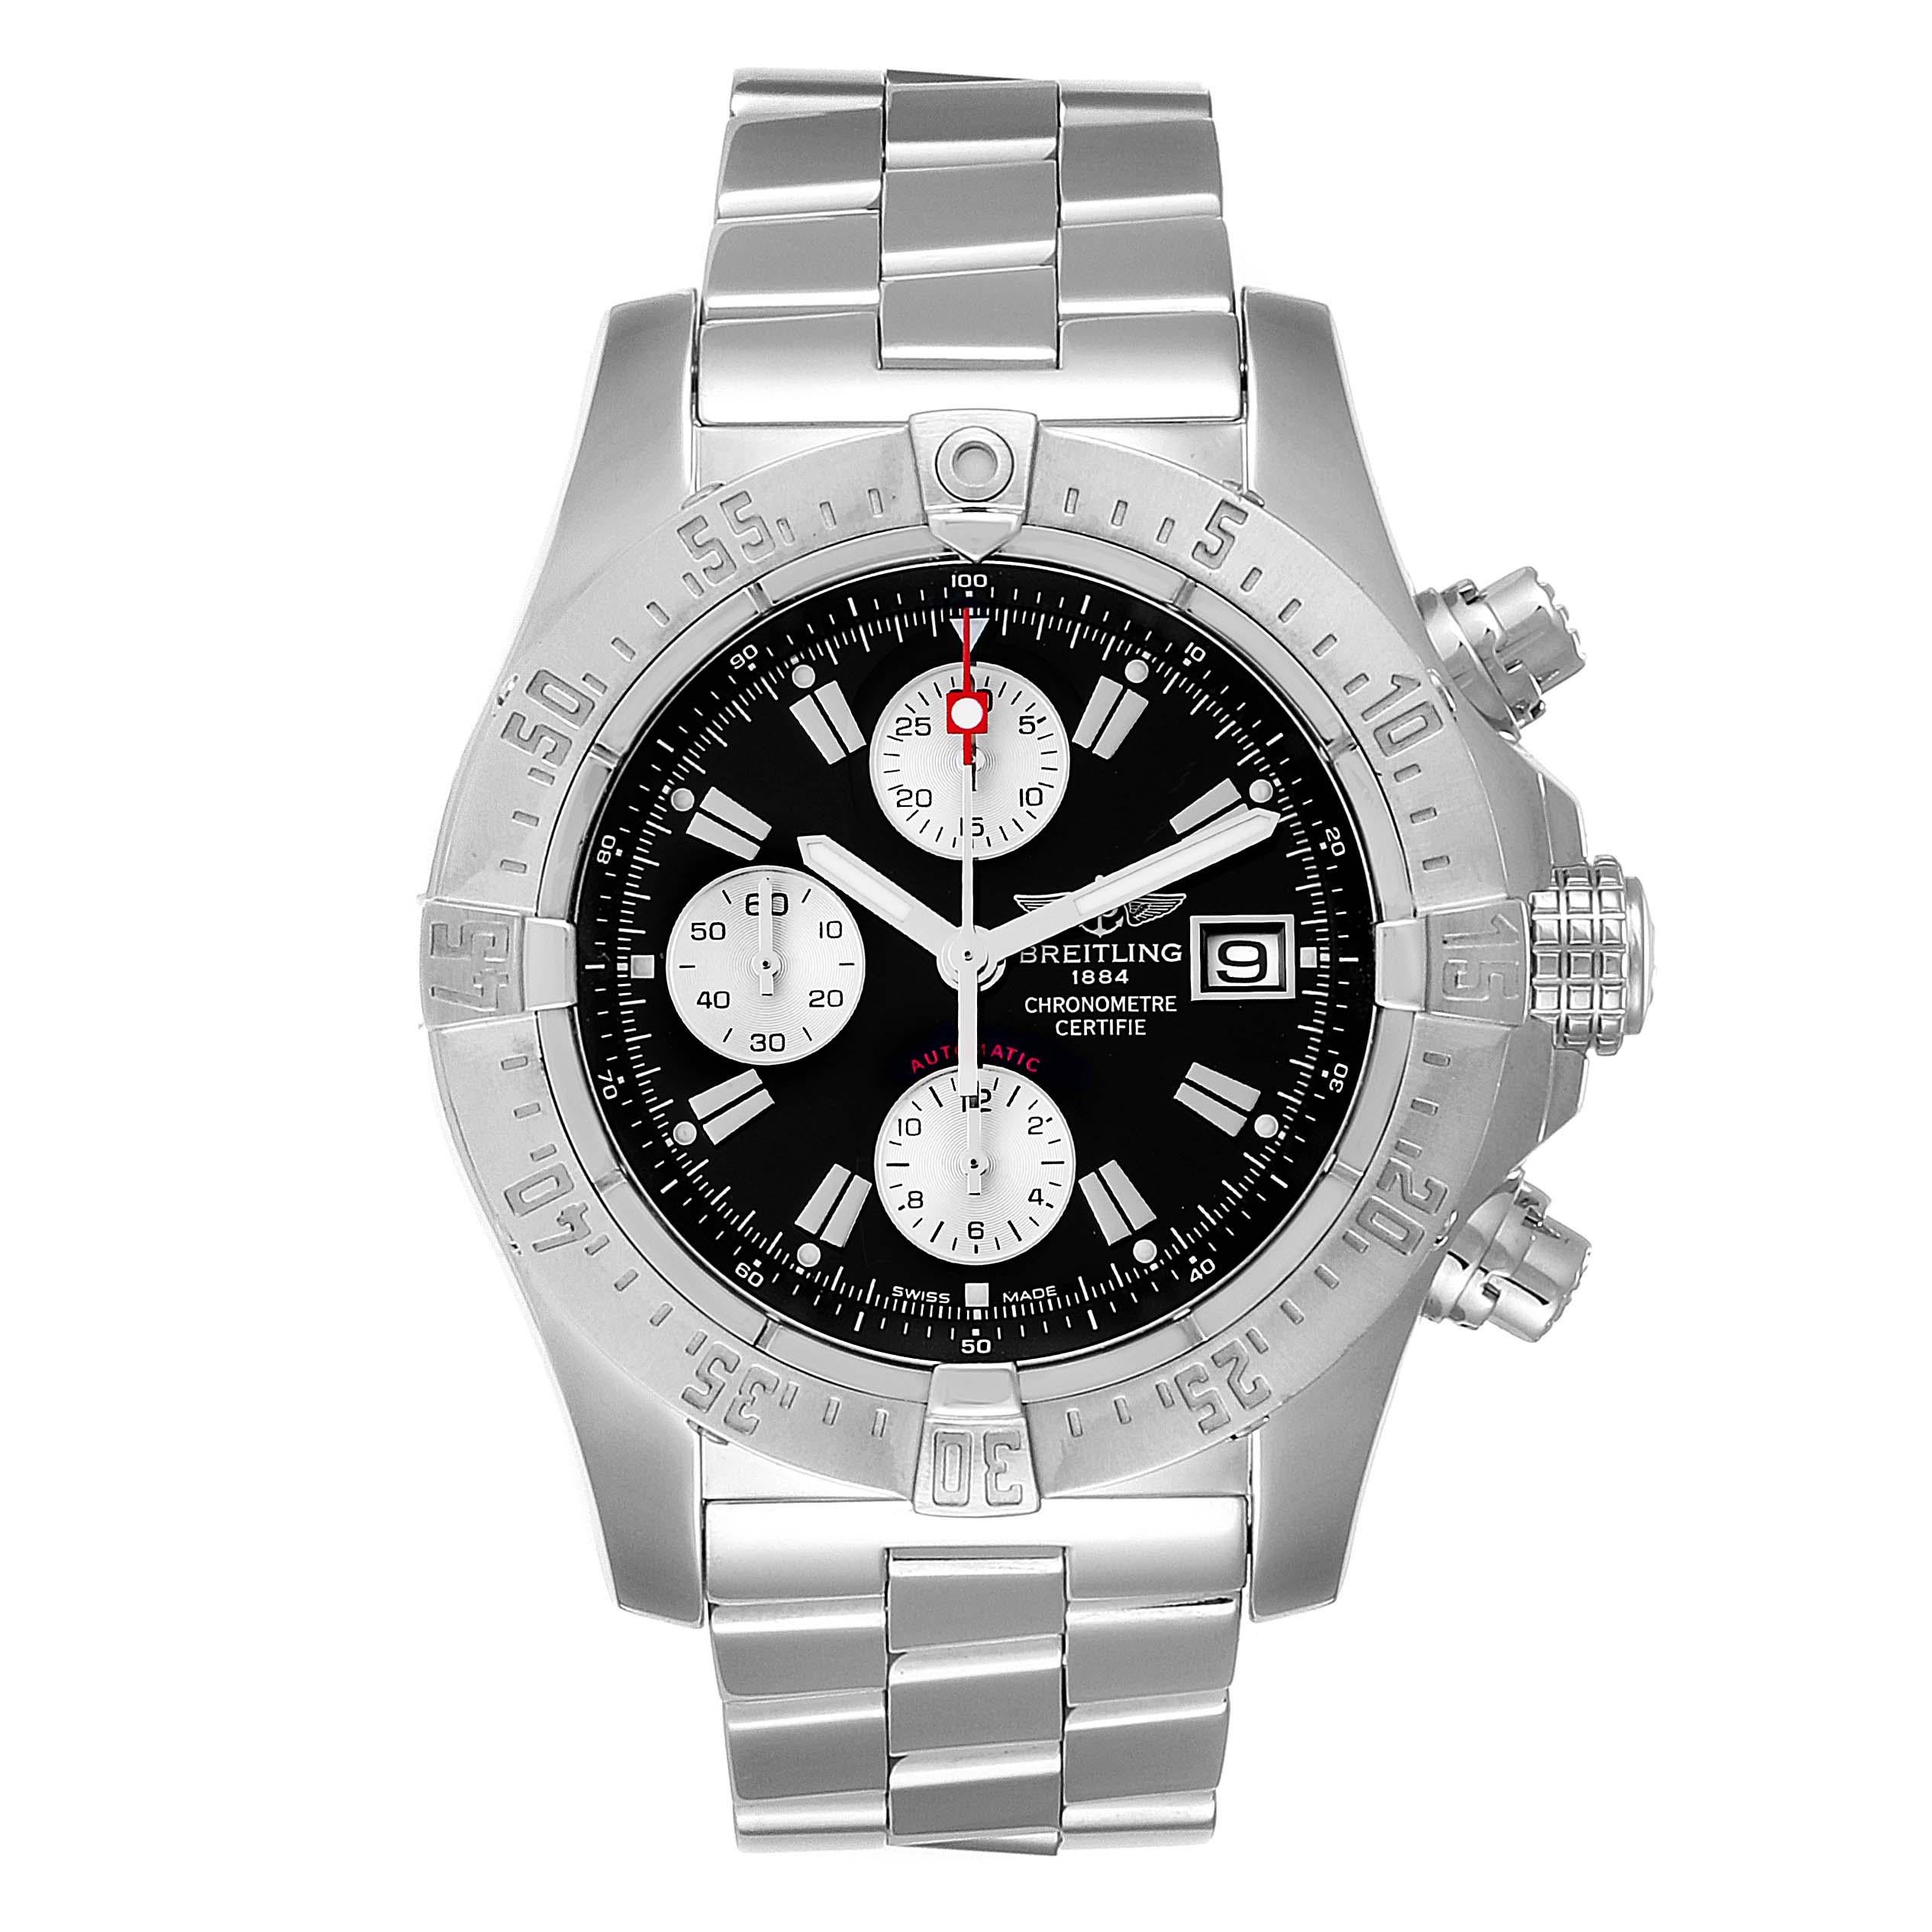 Breitling Aeromarine Avenger Skyland Black Dial Mens Watch A13380. Automatic self-winding movement. Chronograph function. Stainless steel case 45 mm in diameter with screwed-down crown and pushers. Stainless steel unidirectional rotating bezel. 0-60